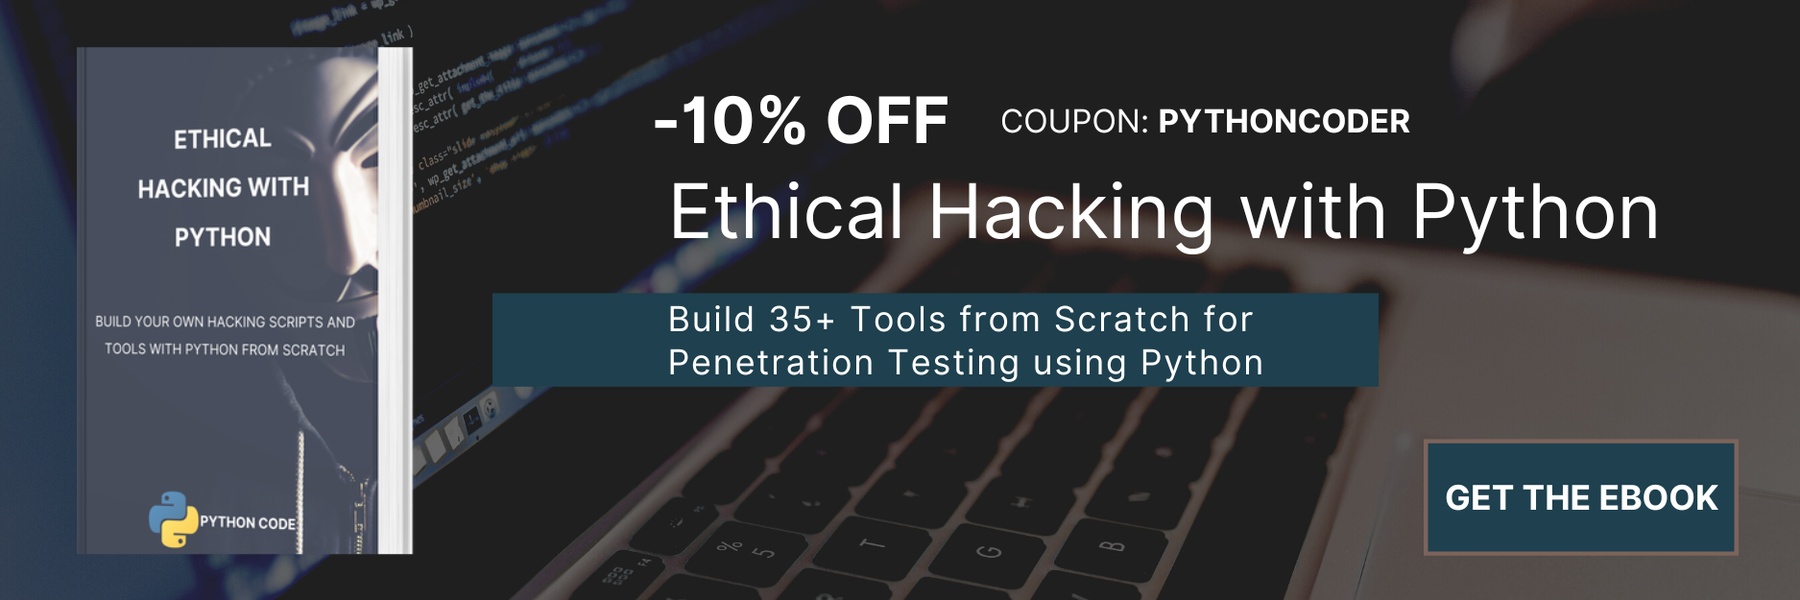 Ethical Hacking with Python eBook